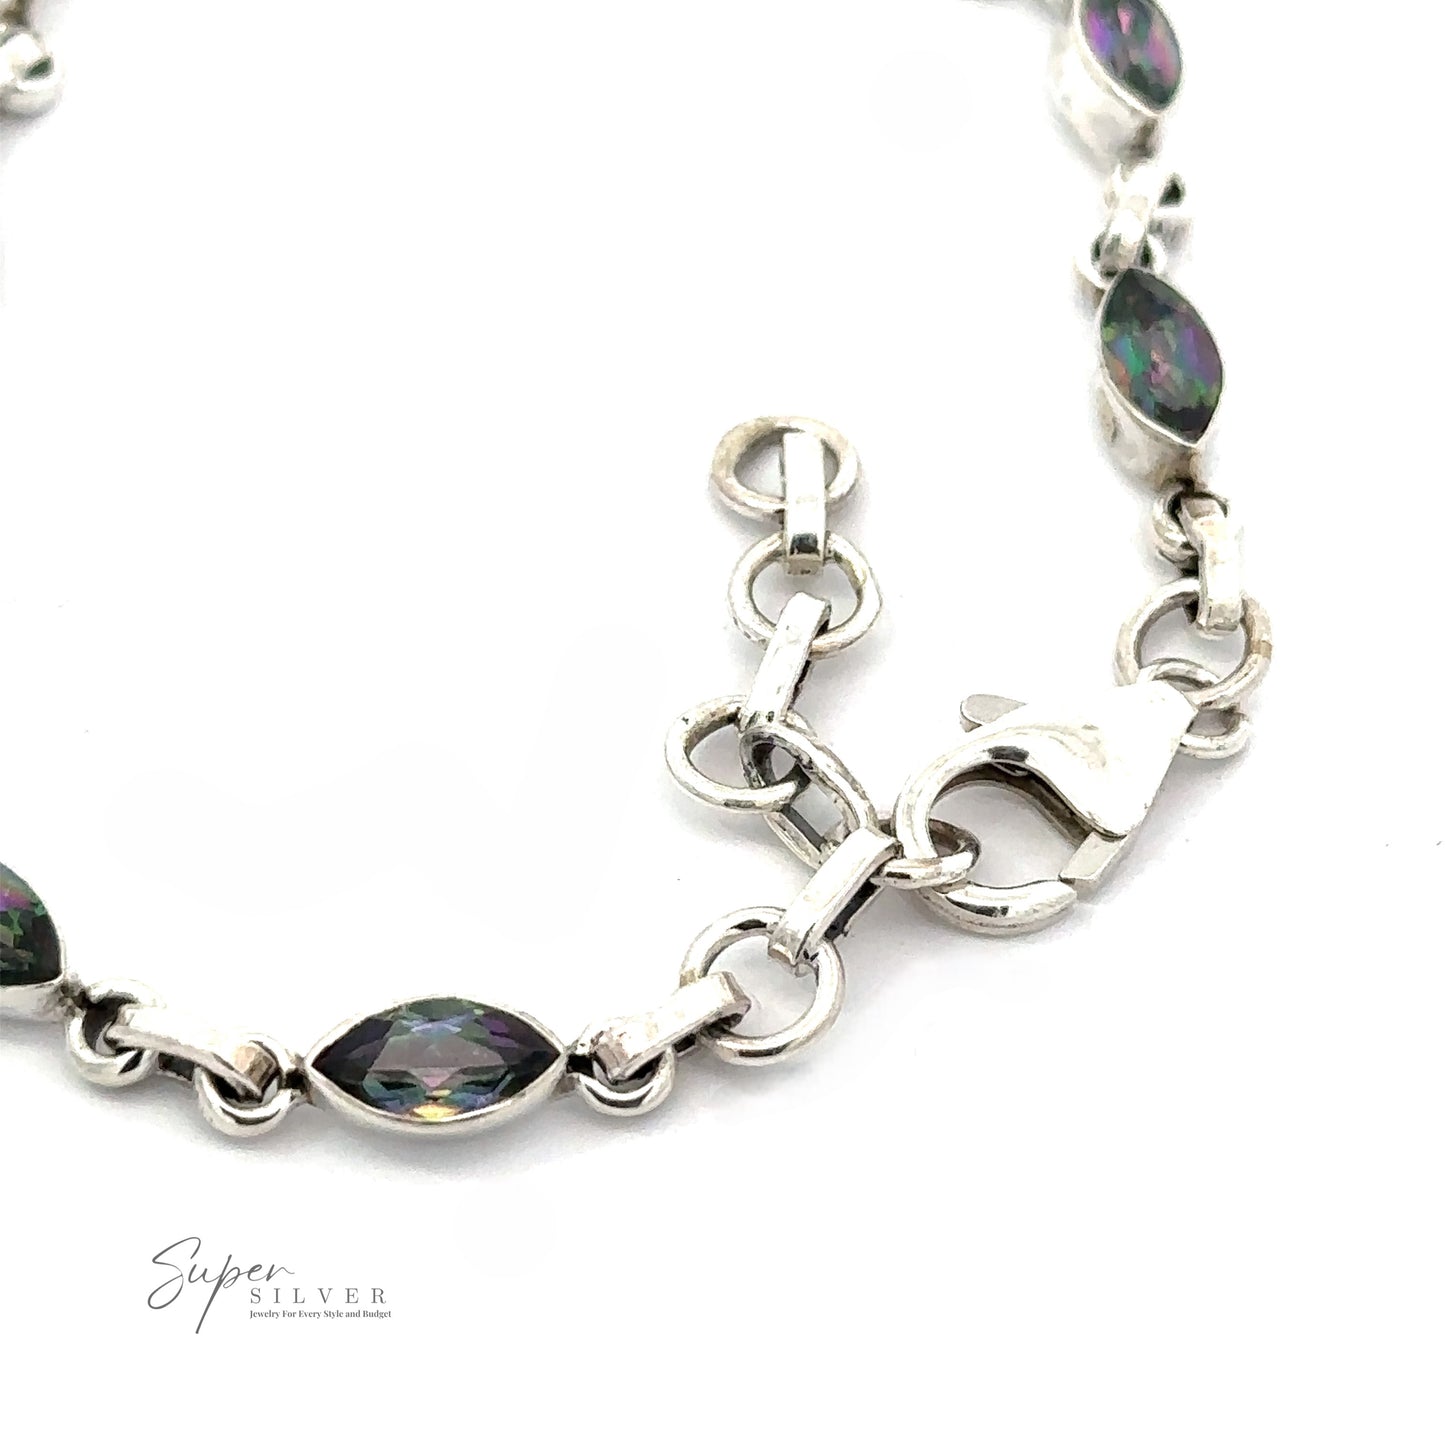 
                  
                    Close-up image of a sterling silver bracelet with oval-shaped multicolored gemstones and a lobster claw clasp. The text "Super Silver" is visible in the bottom left corner. This exquisite piece, accented with Rainbow Mystic Topaz Marquise Link Bracelet, shines brightly for any occasion.
                  
                